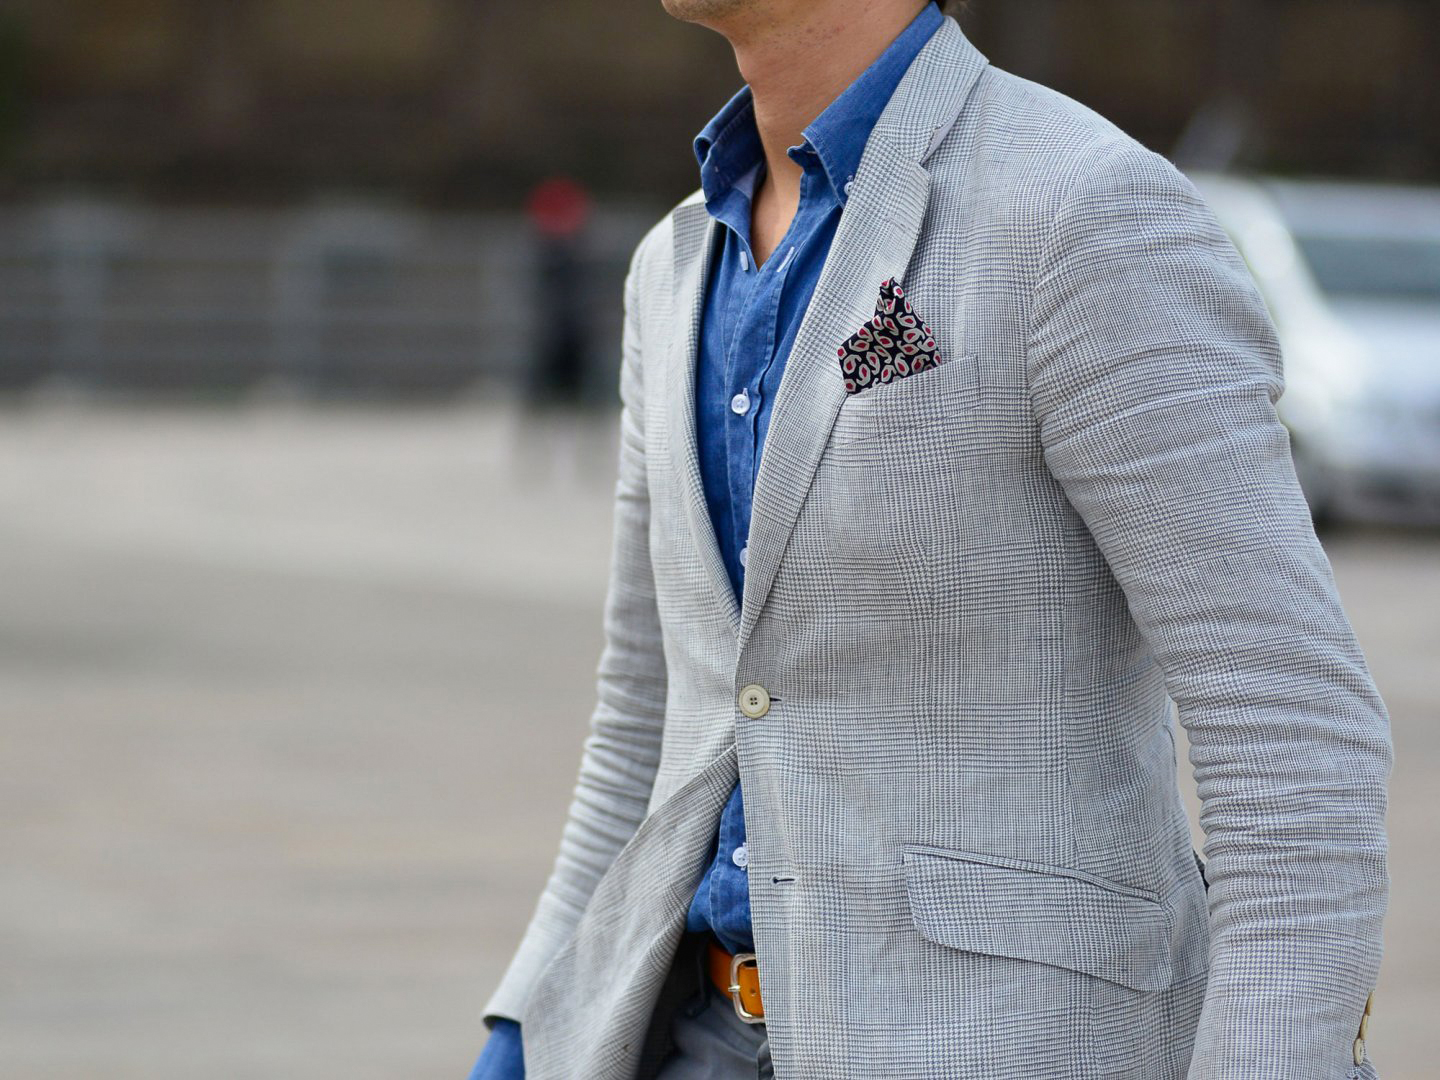 How Would You Wear A Blue Jacket? - Men's Fashion For Less